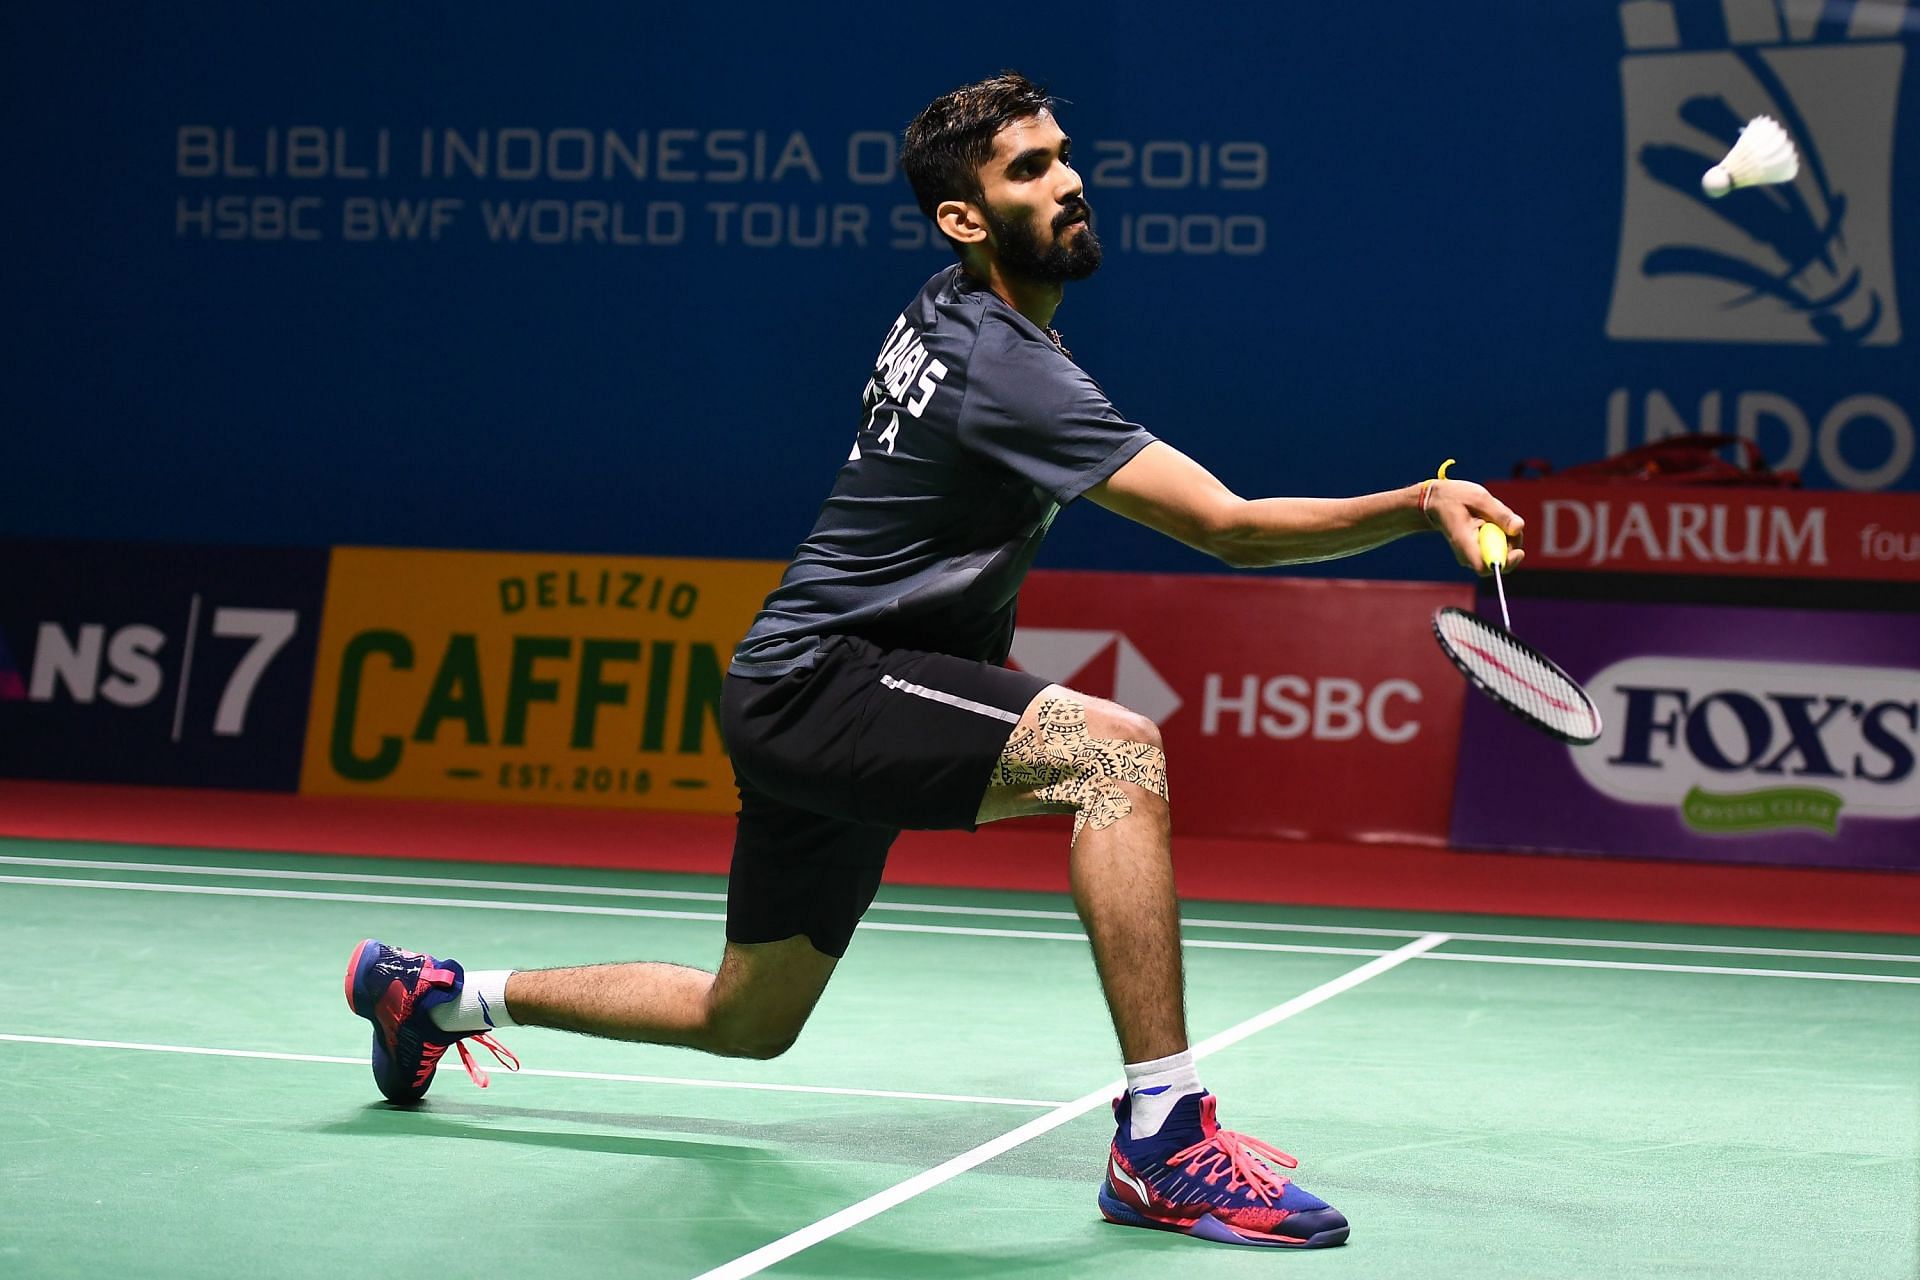 Kidambi Srikanth in action at the Bli Bli Indonesia Open (Image courtesy: Getty Images)